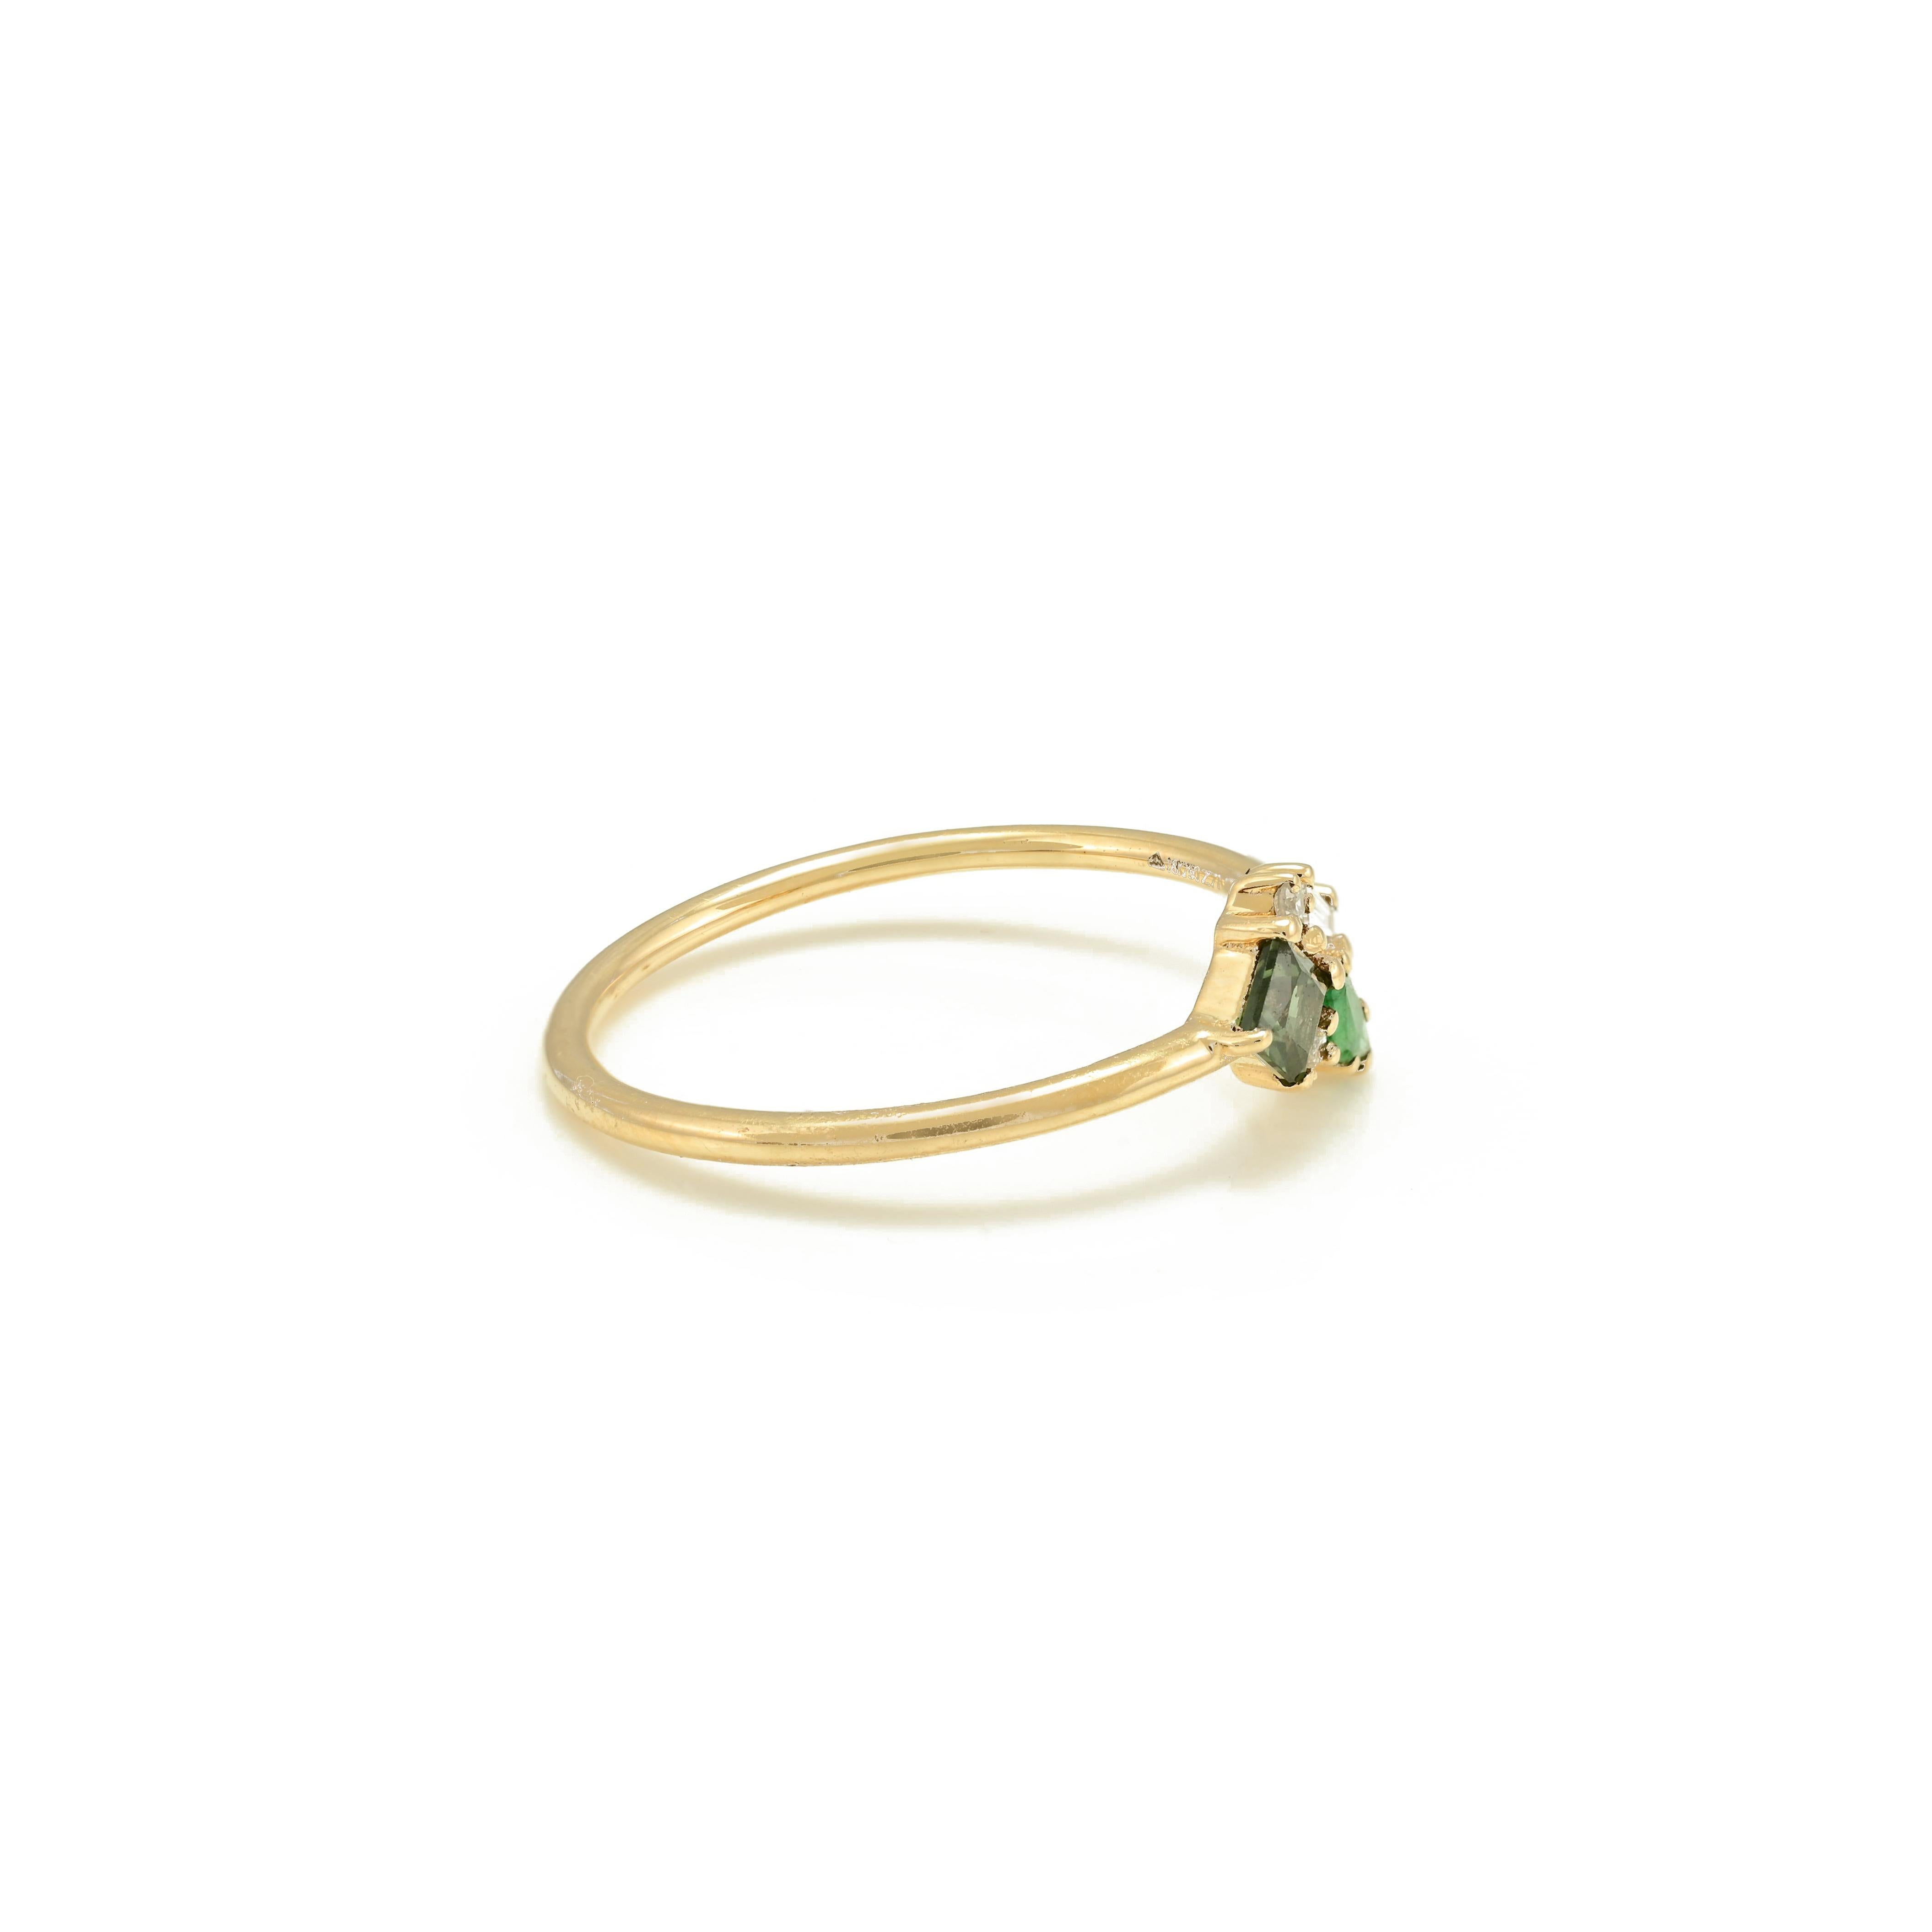 For Sale:  Minimalist Multi Color Gemstone Cluster Ring in 18k Solid Yellow Gold 7